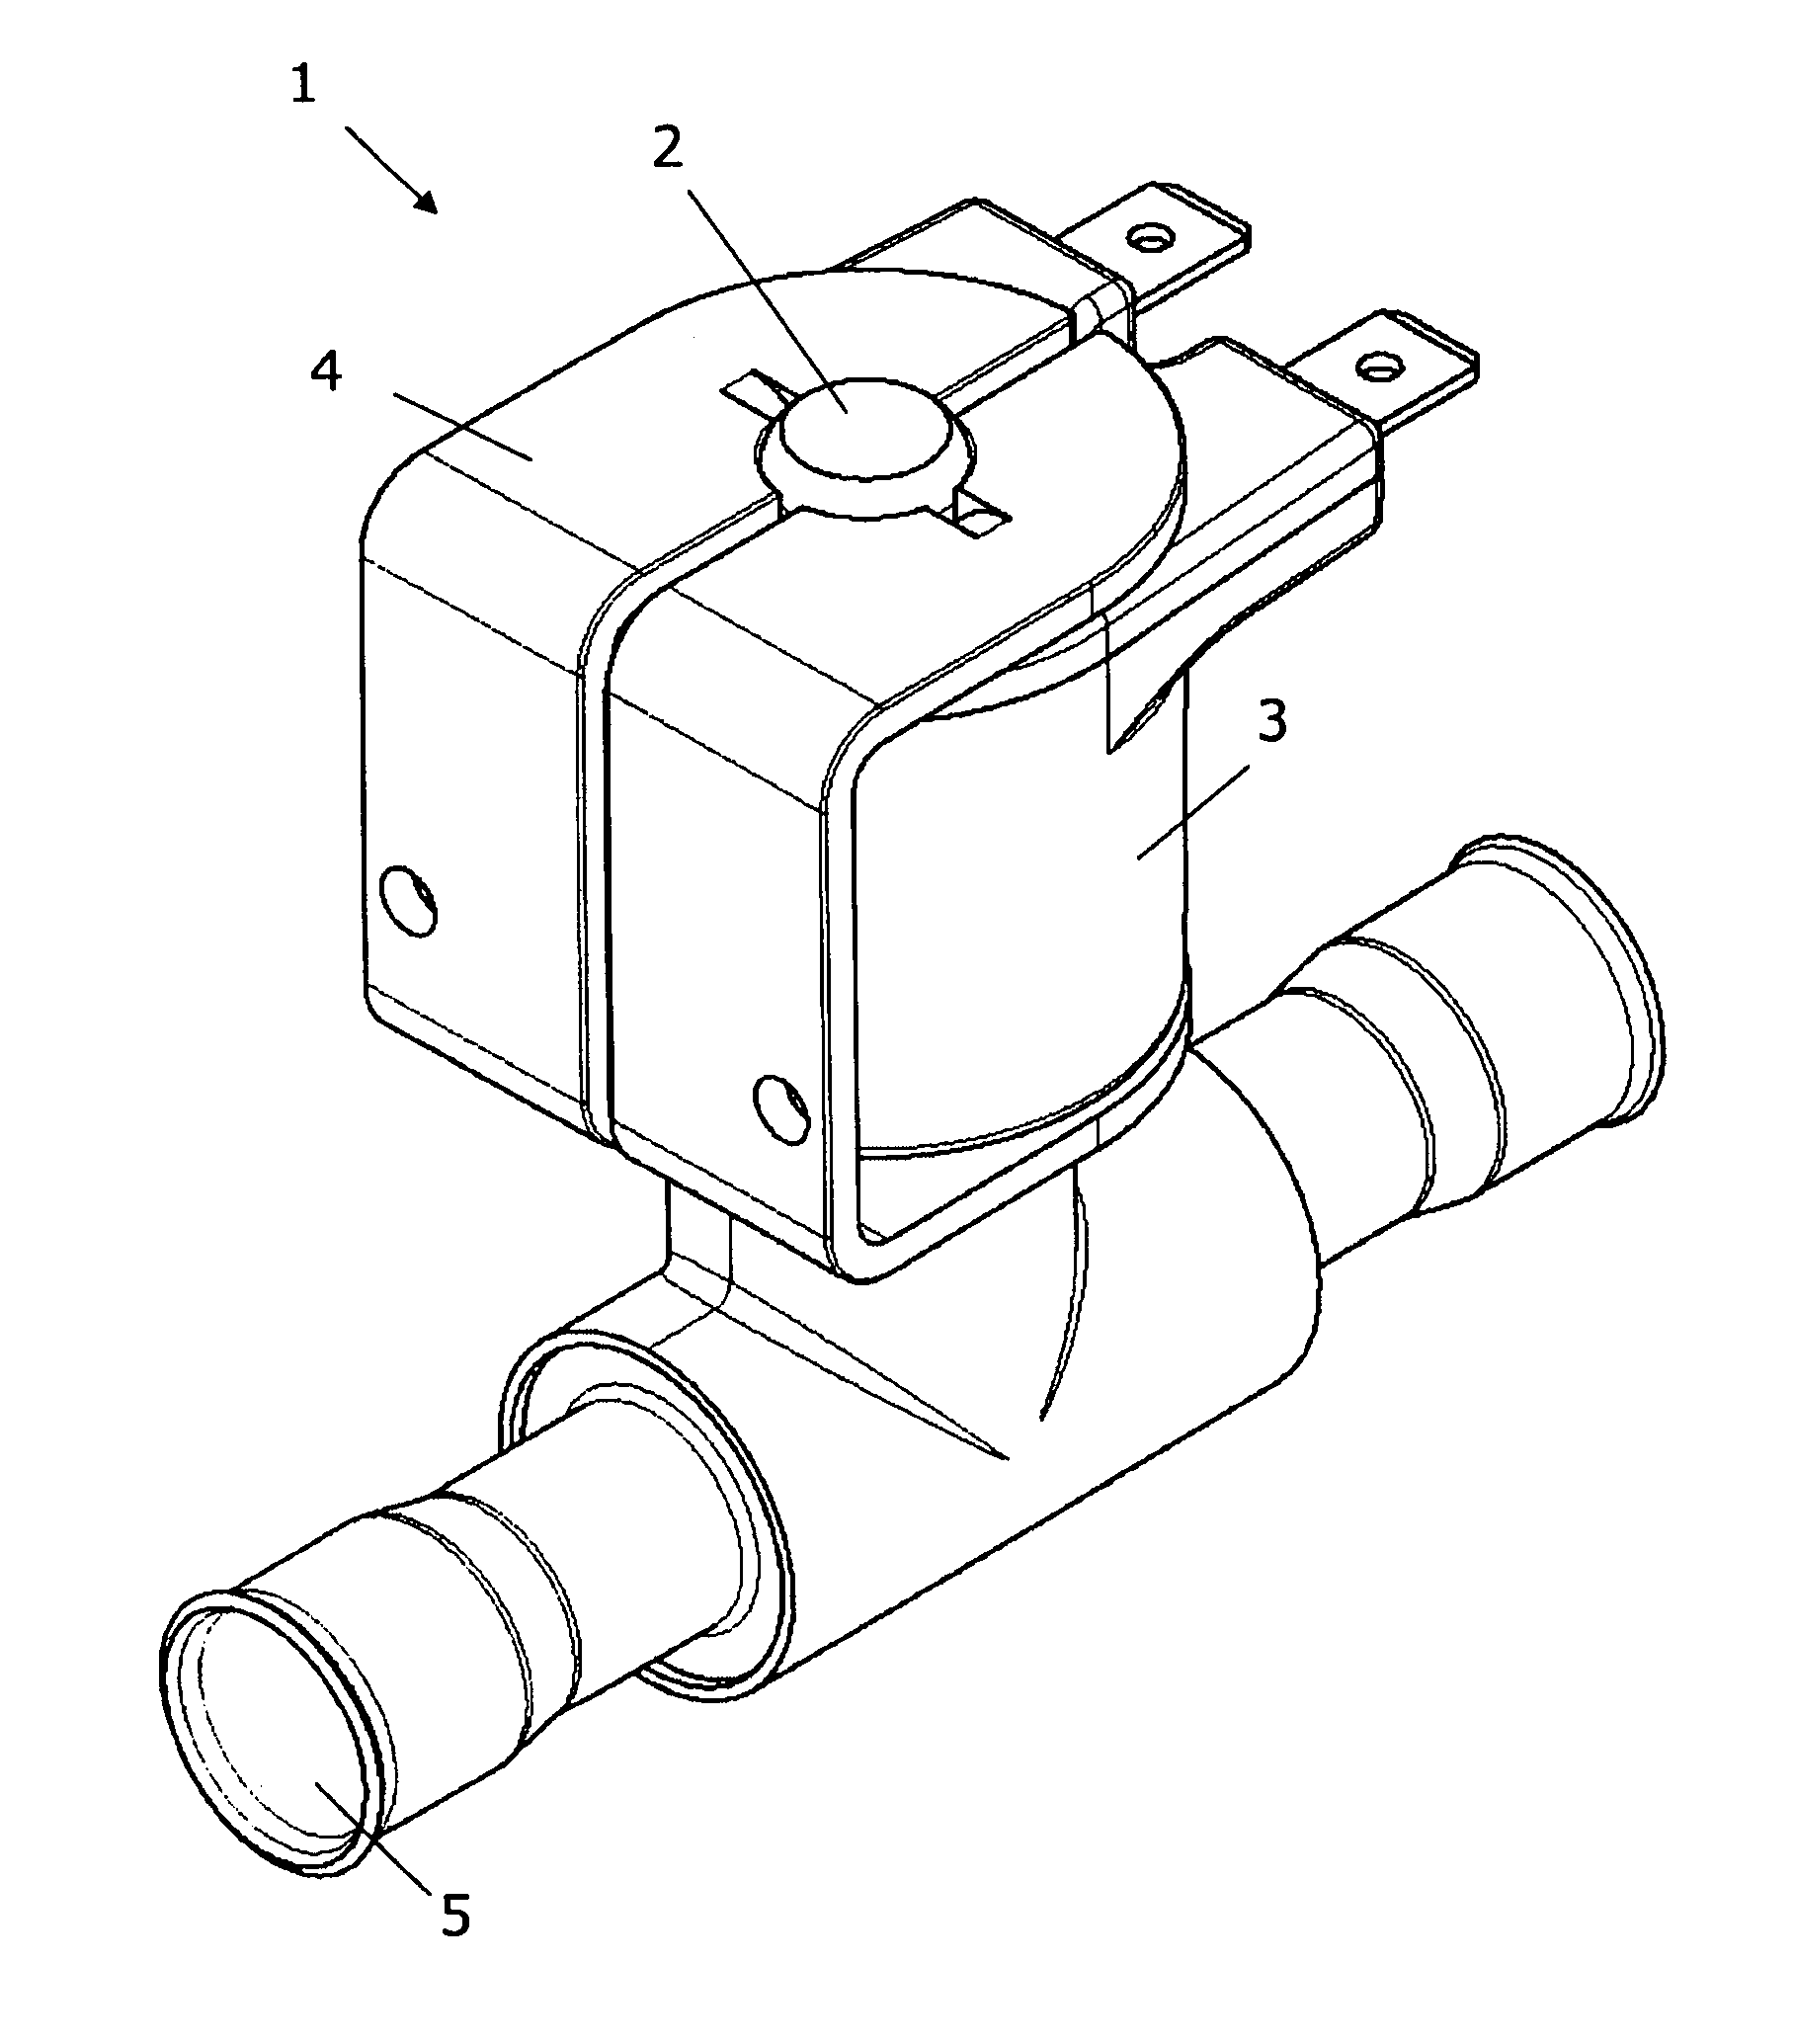 Valve with a solenoid fixed to a plunger tube by a yoke